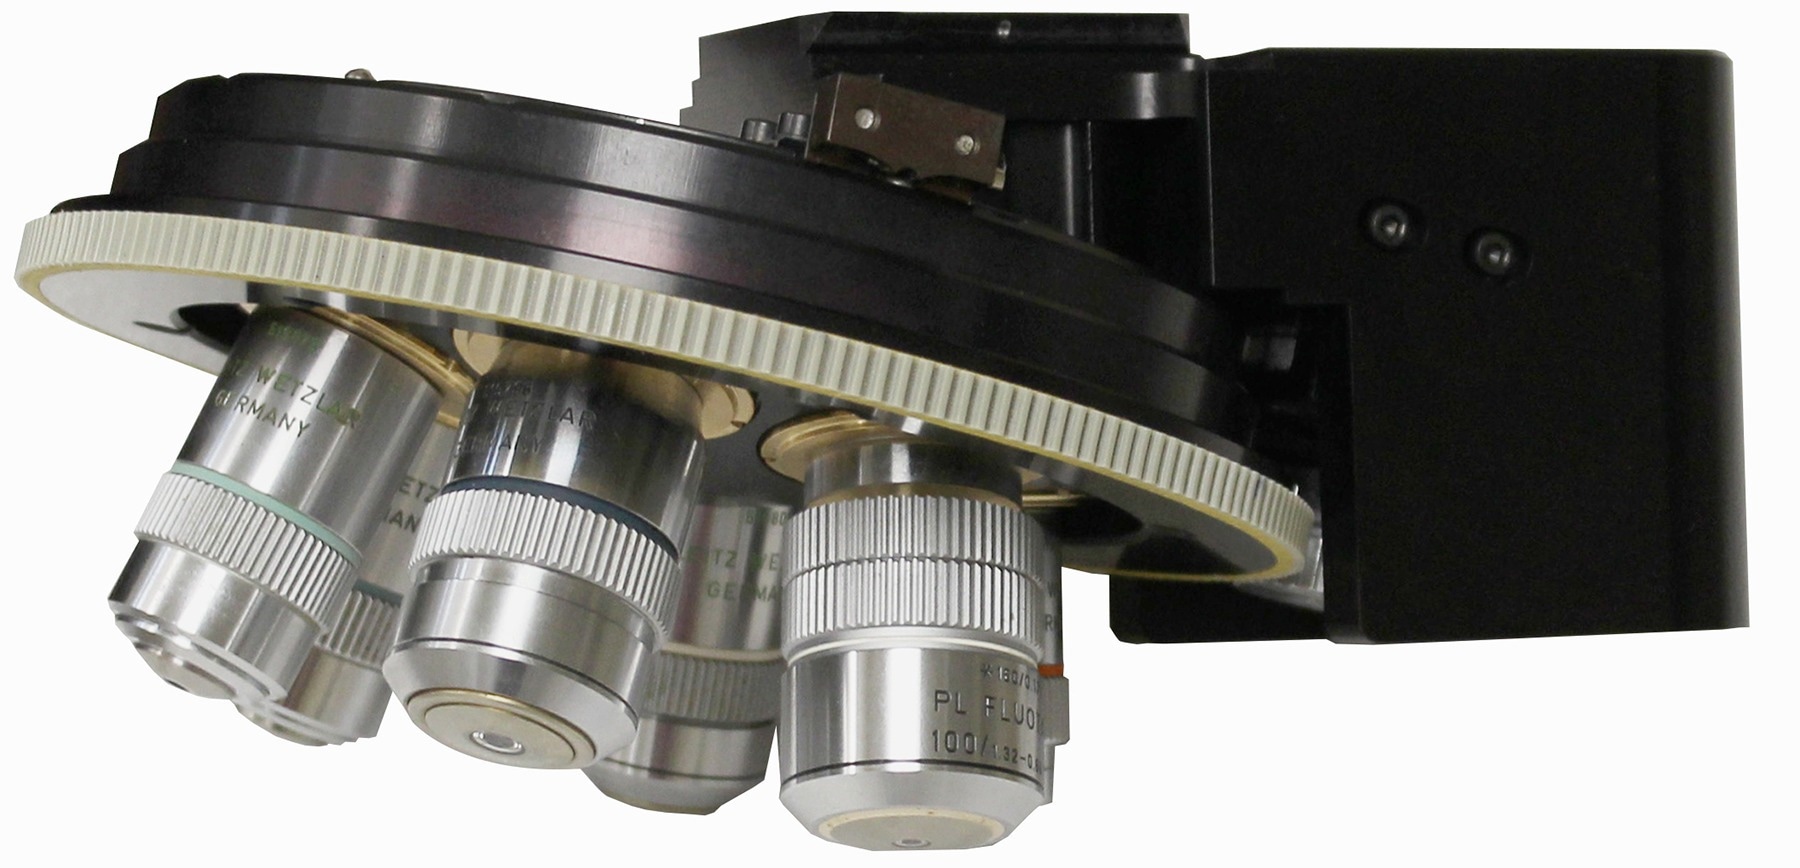 Prior Scientific Introduces Motorized Nosepieces for Use with OpenStand Microscopes